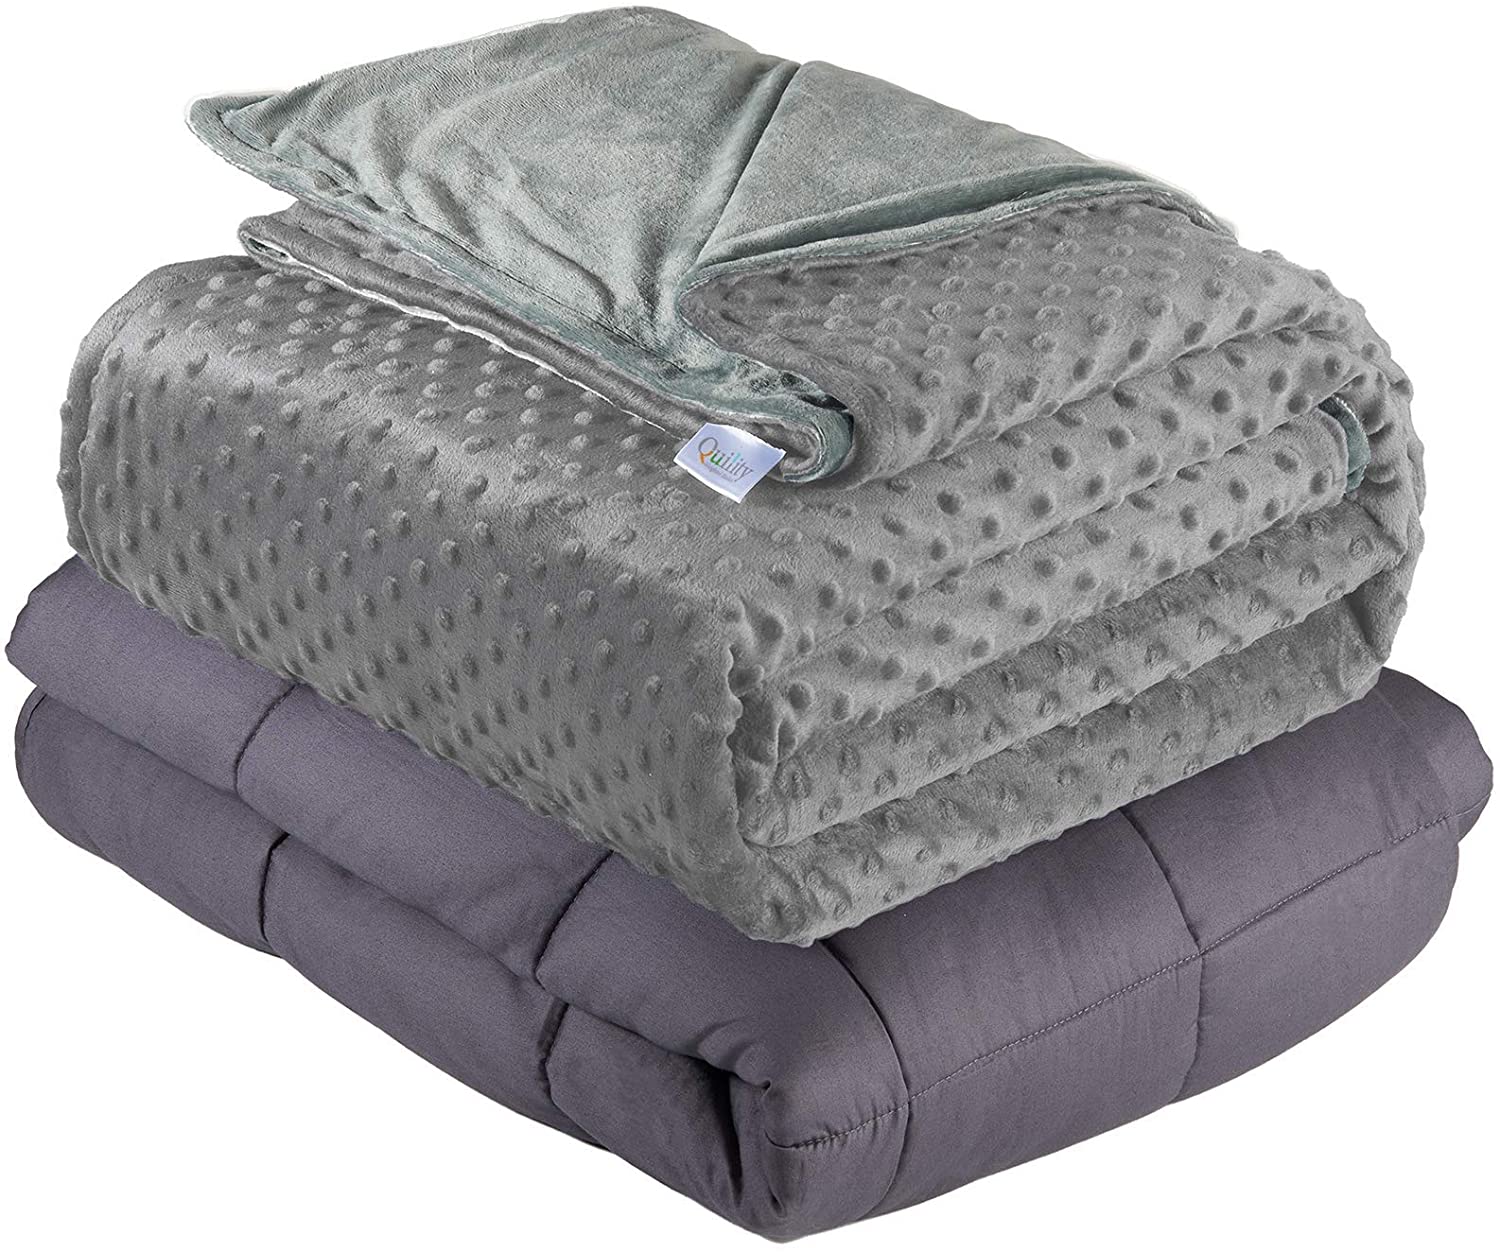 Quility Premium Adult Weighted Blanket & Removable Cover | 15 lbs | 86